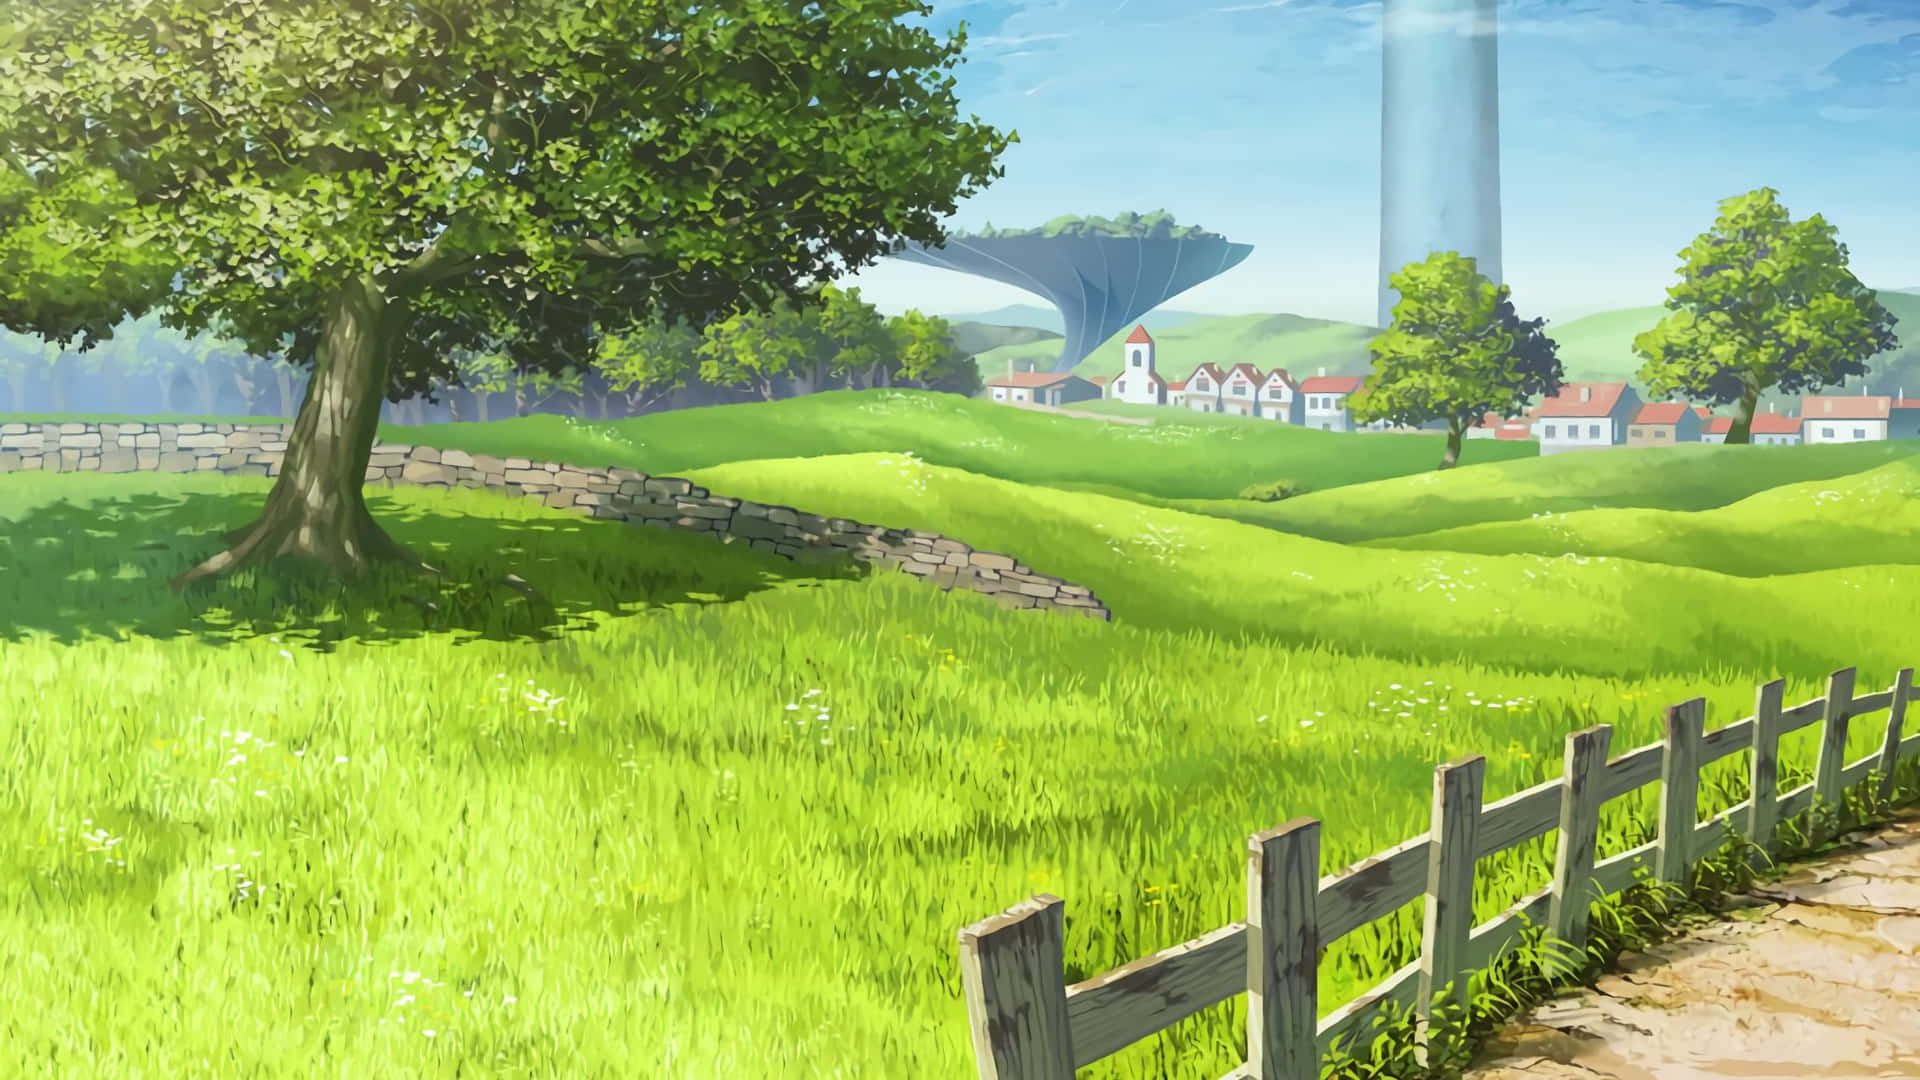 An Animated Character From The Popular Anime Series Sword Art Online, Set Against A Beautifully Designed Background.